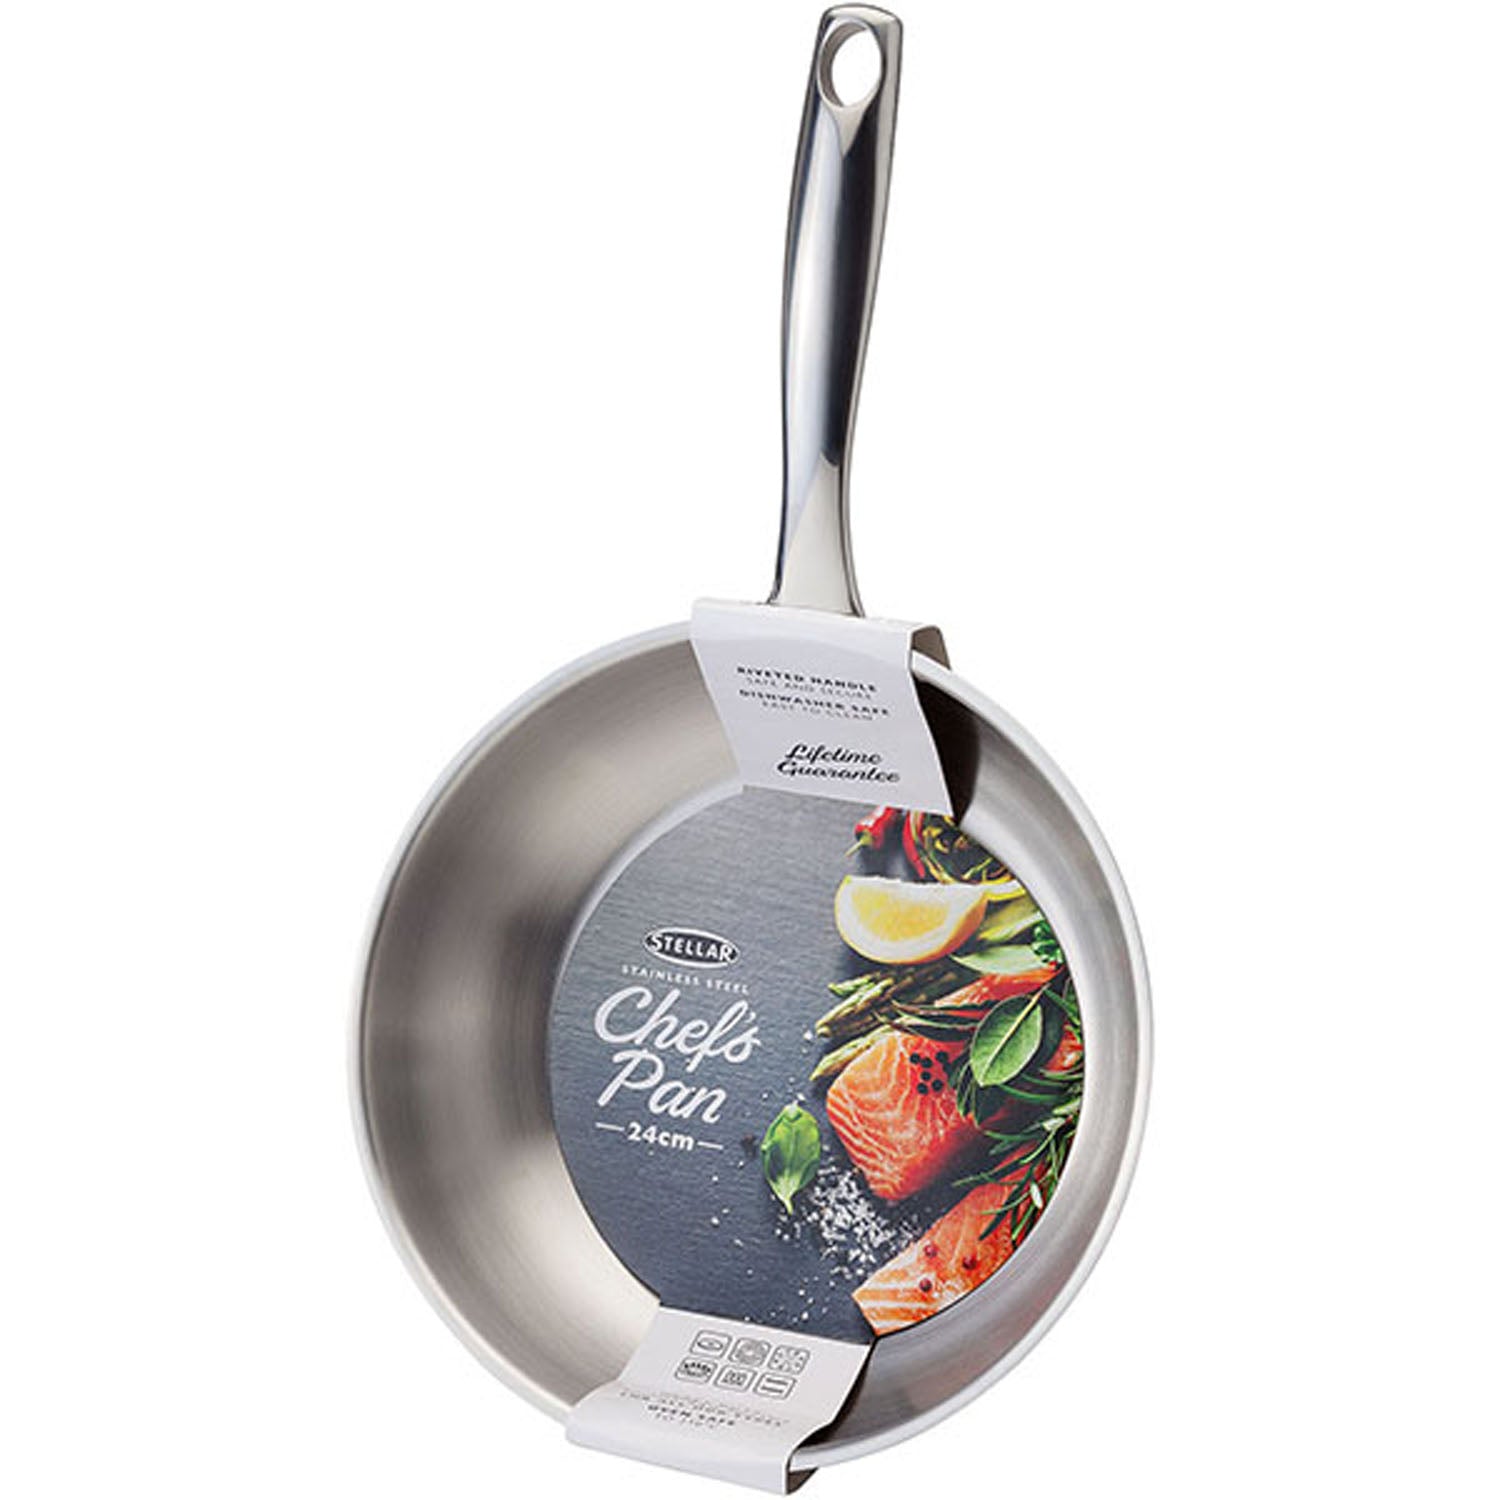 Tower Speciality Cookware 24cm Chefs Pan 1 Shaws Department Stores